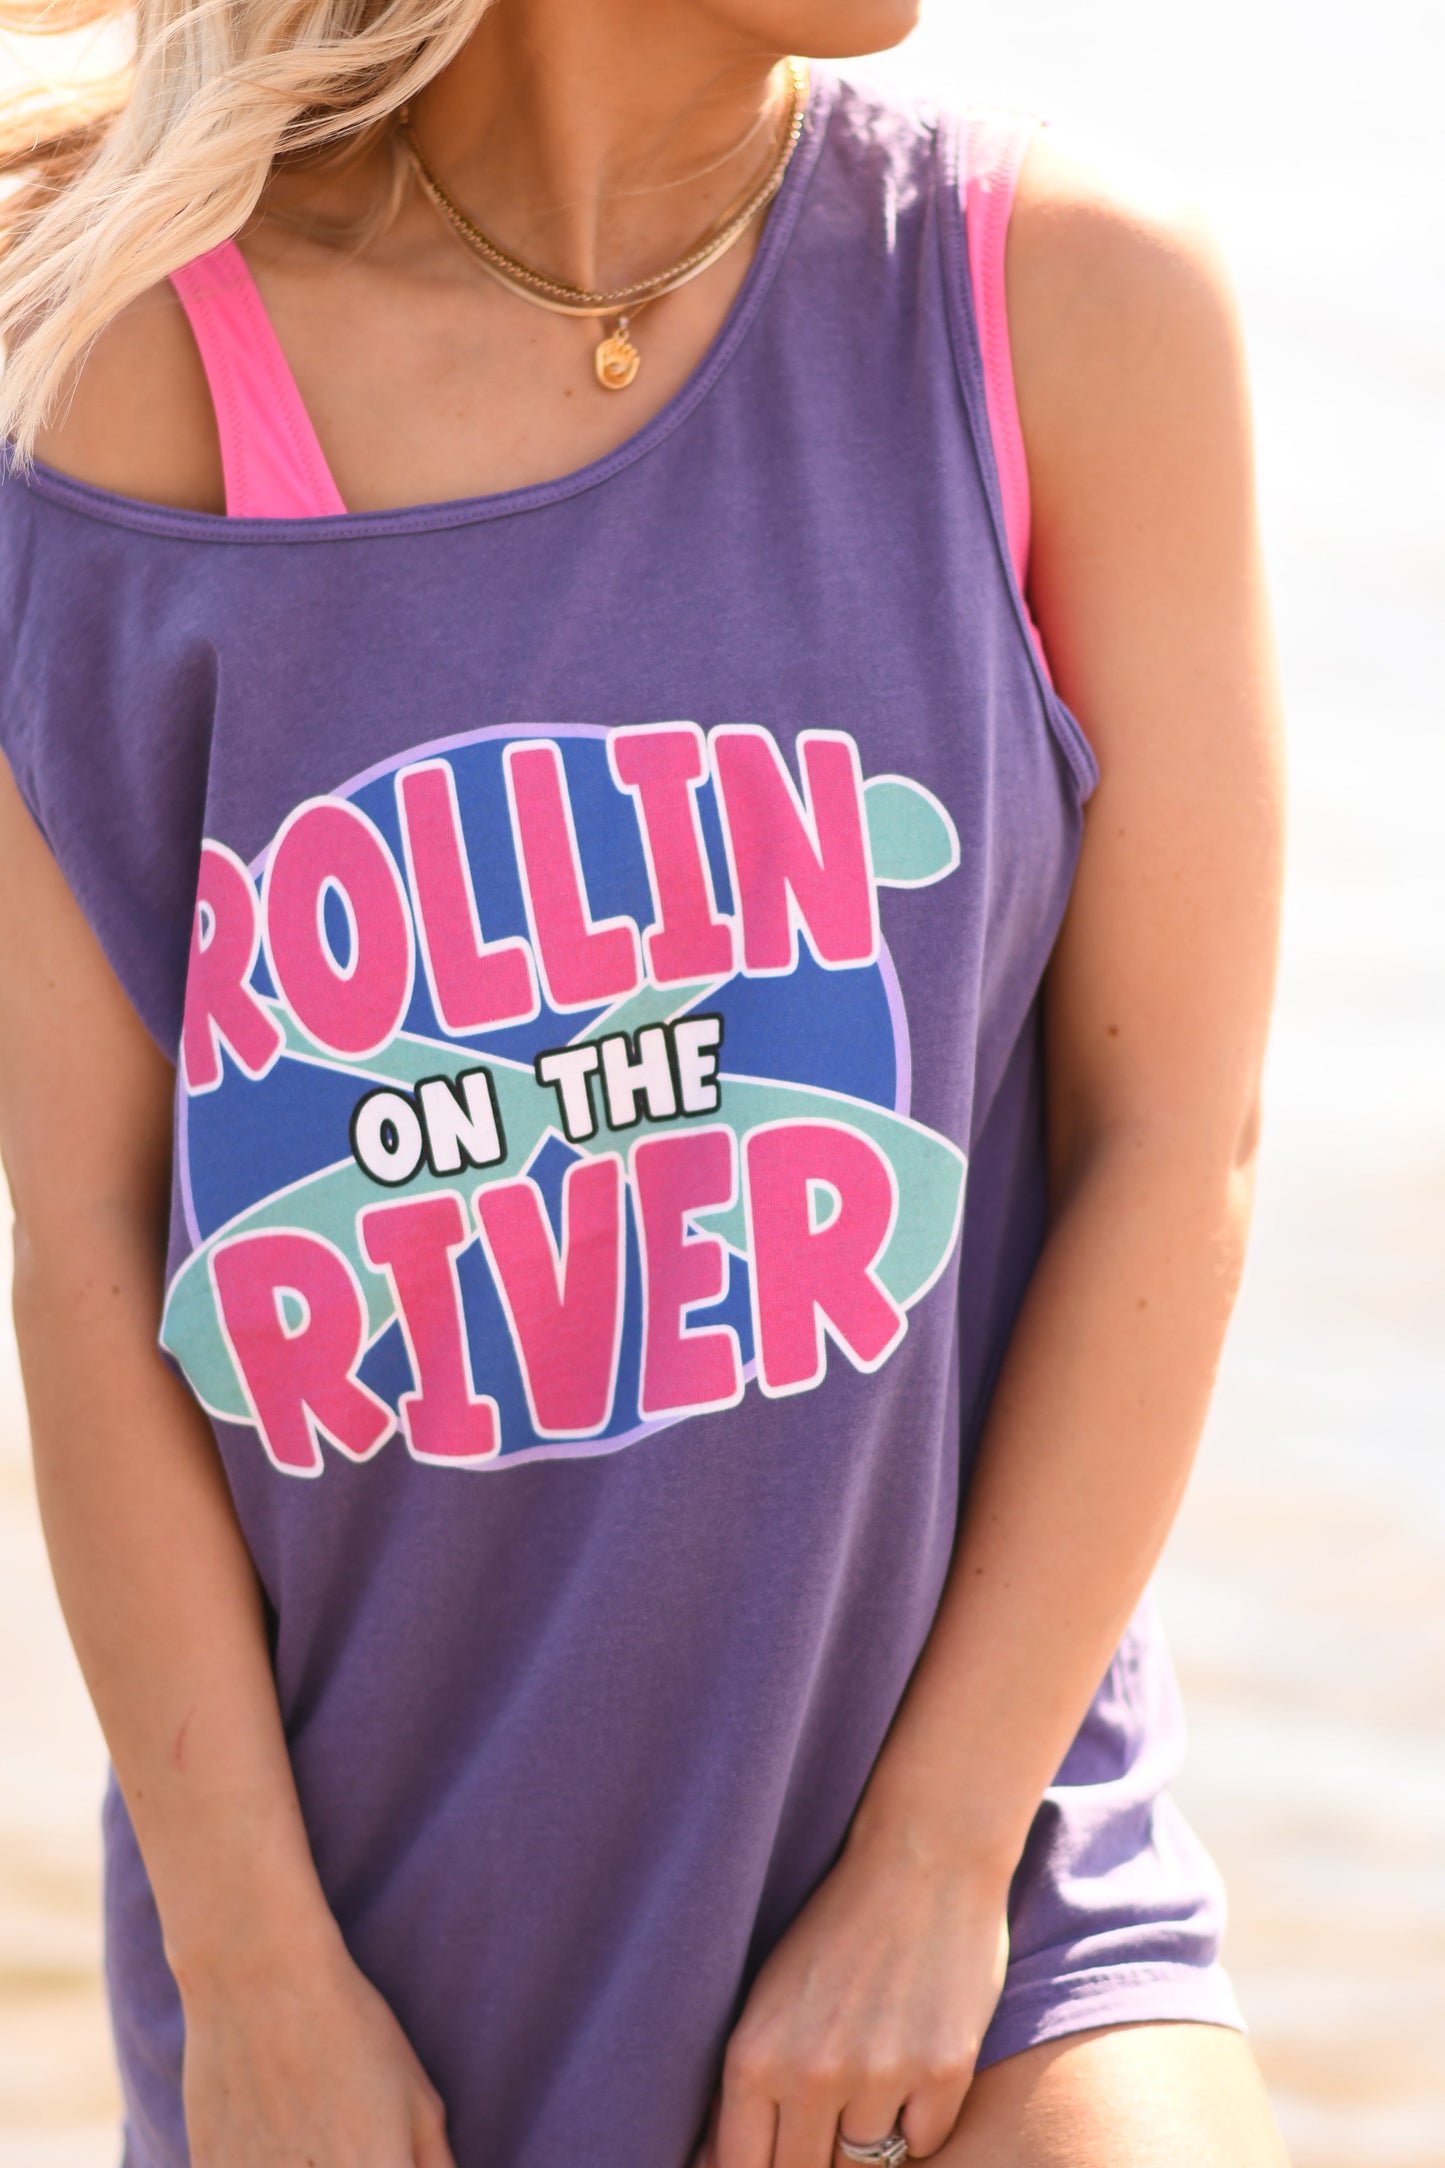 Rolling on the river tee/tank